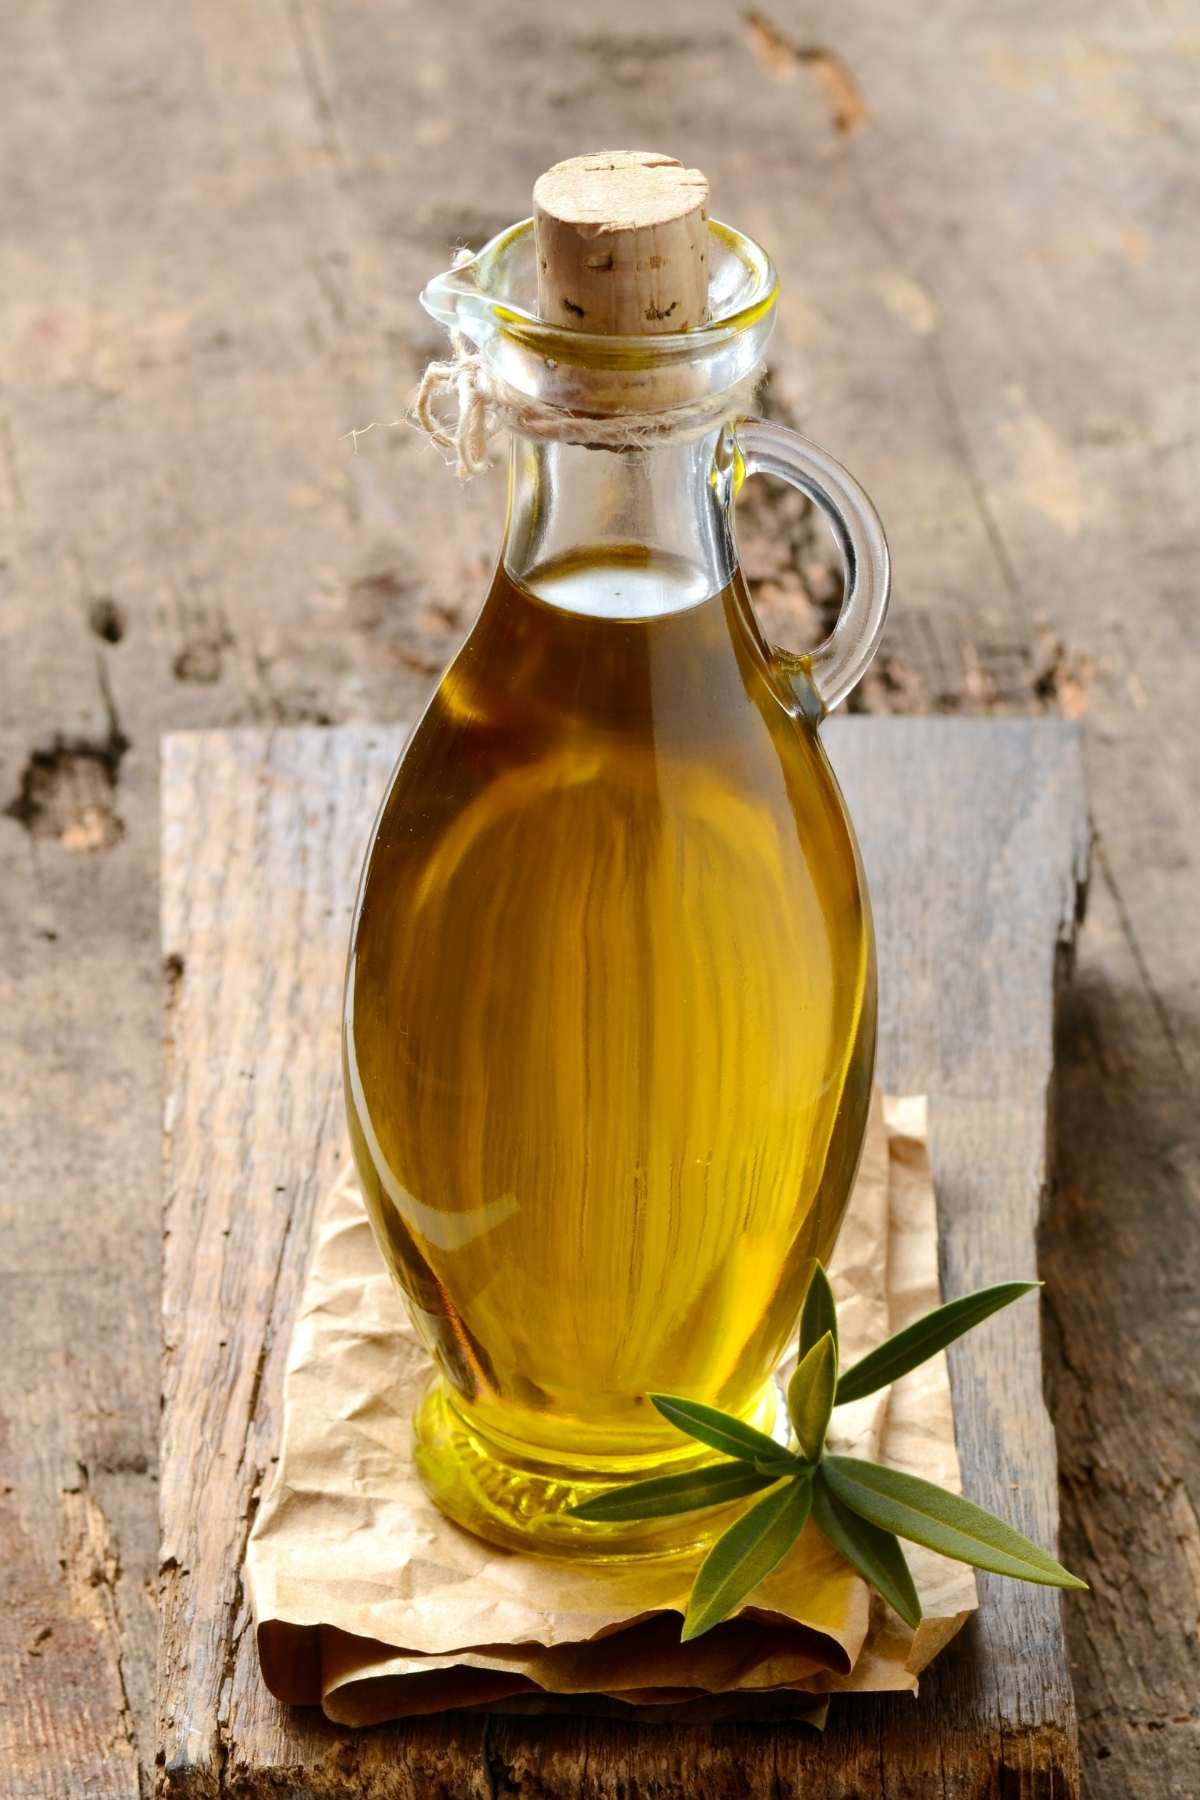 EVOO, or Extra Virgin Olive Oil, is a versatile ingredient that has been used in recipes all over the world for centuries. Whether you drizzle it over a salad, toss it into a stew, or enjoy it with balsamic vinegar and fresh bread, EVOO is a great ingredient to keep in your kitchen.